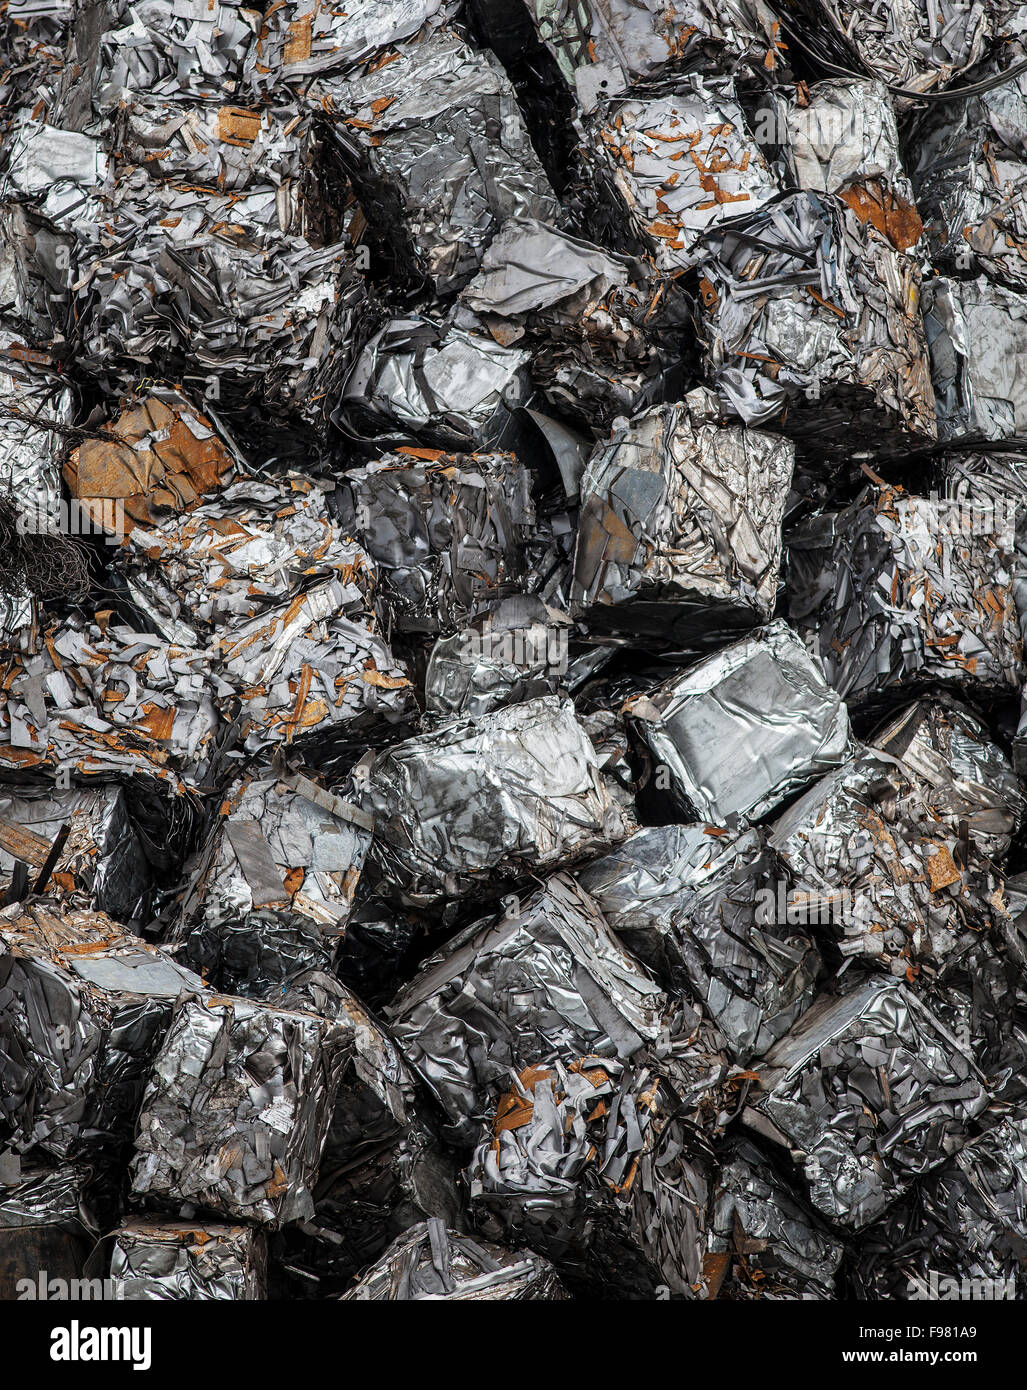 Blocks of scrap metal to be recycled. Stock Photo